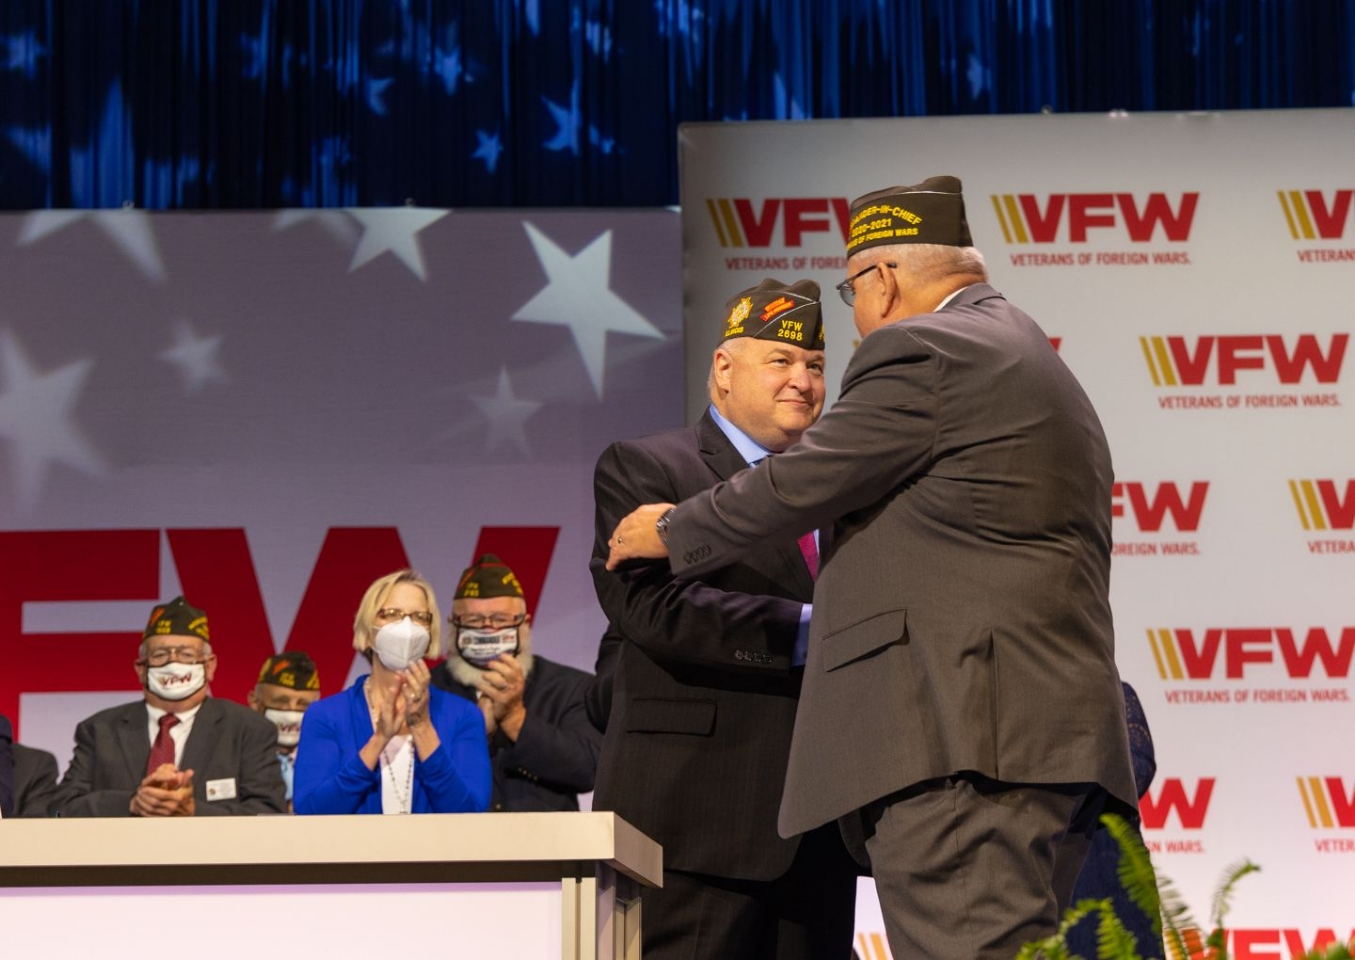 Veterans of Foreign Wars National Convention 30 July 3 August 2021 Kansas City Missouri. Illinois own Veterans of Foreign Wars National Commander in Chief Fritz Mihelcic is congratulated by Past Veterans of Foreign Wars  National Commander in Chief Hal Roesch